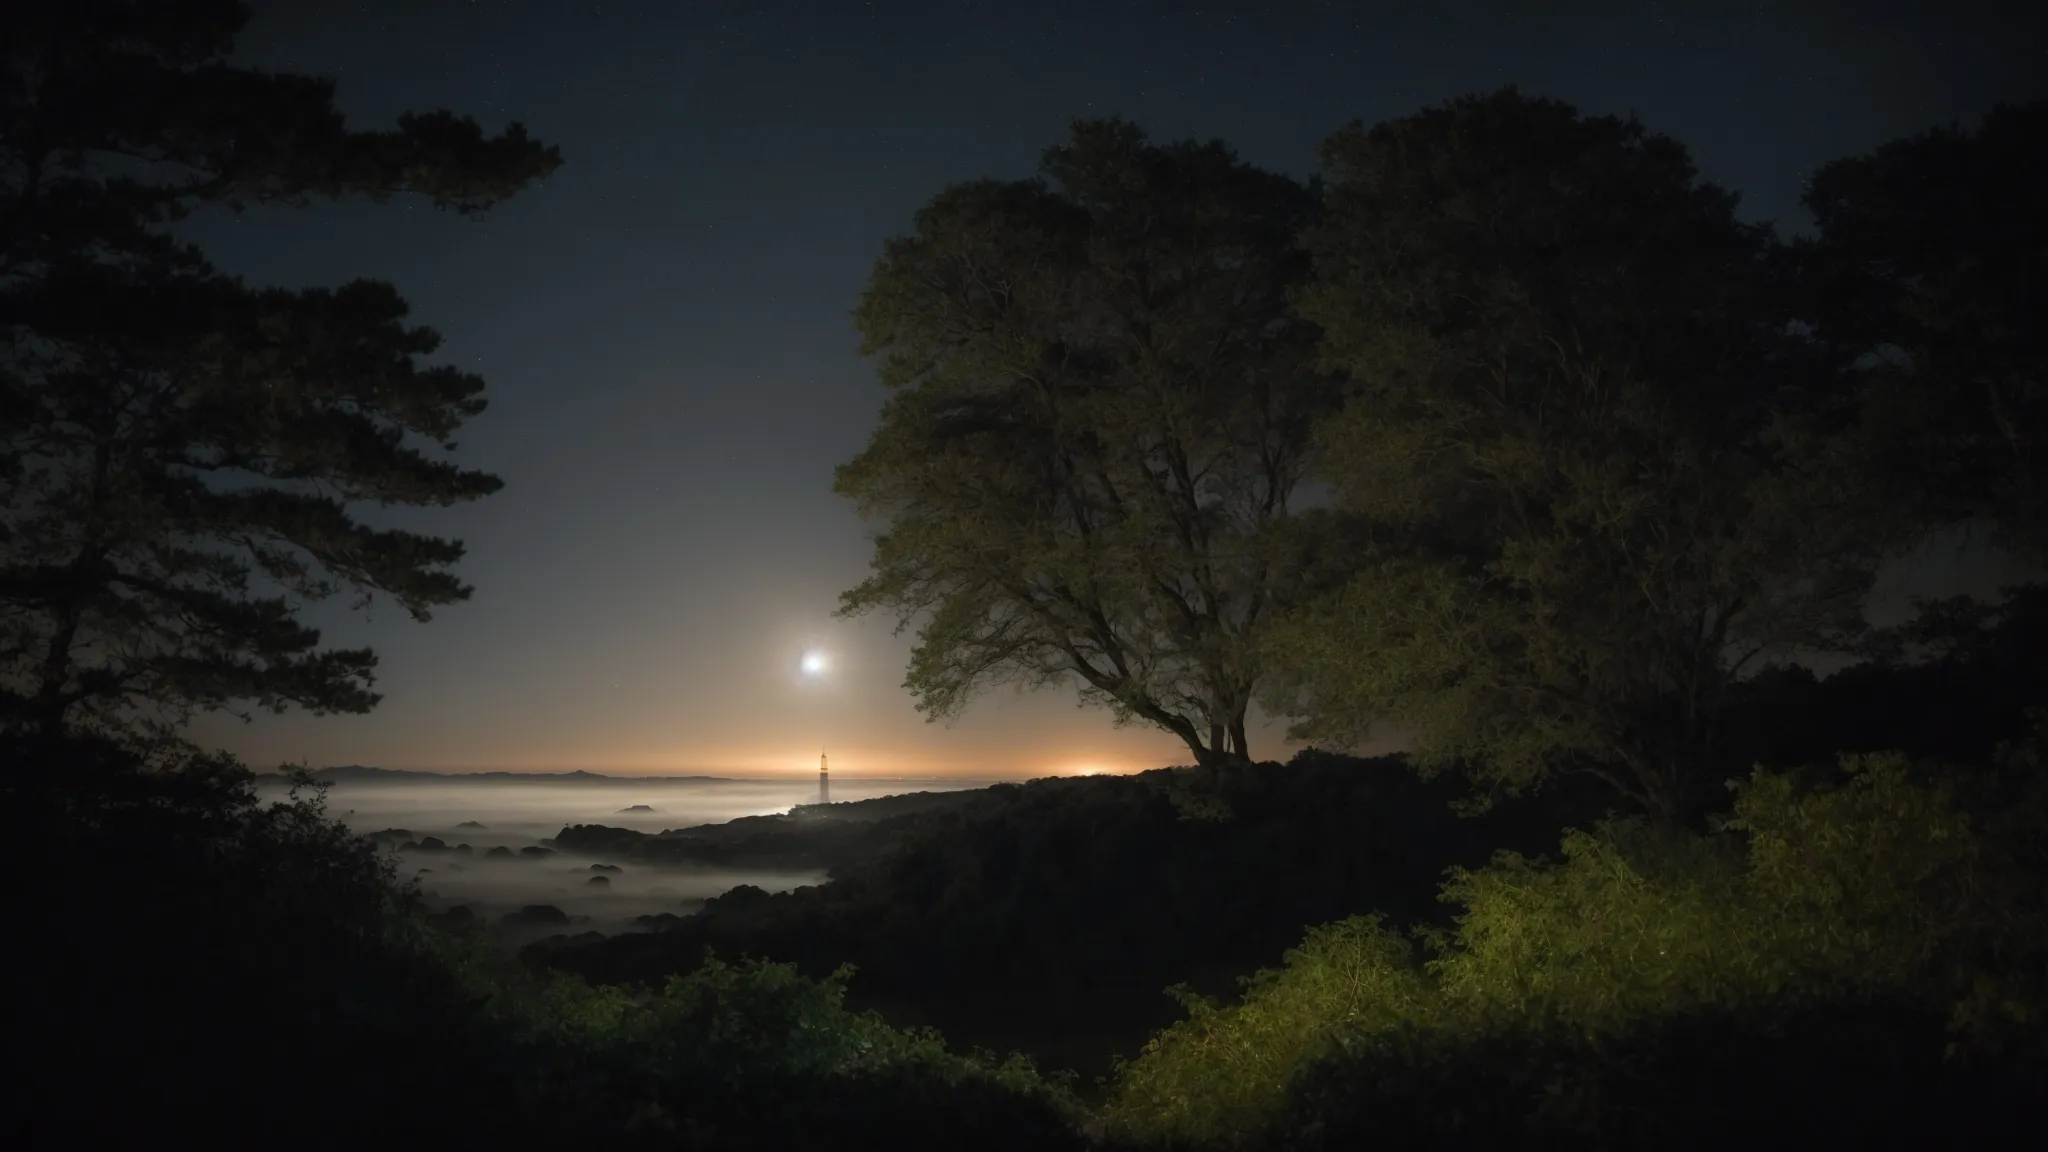 a broad, forested landscape opens under a starlit sky, where a distant lighthouse illuminates paths through the trees, symbolizing guidance and discovery.